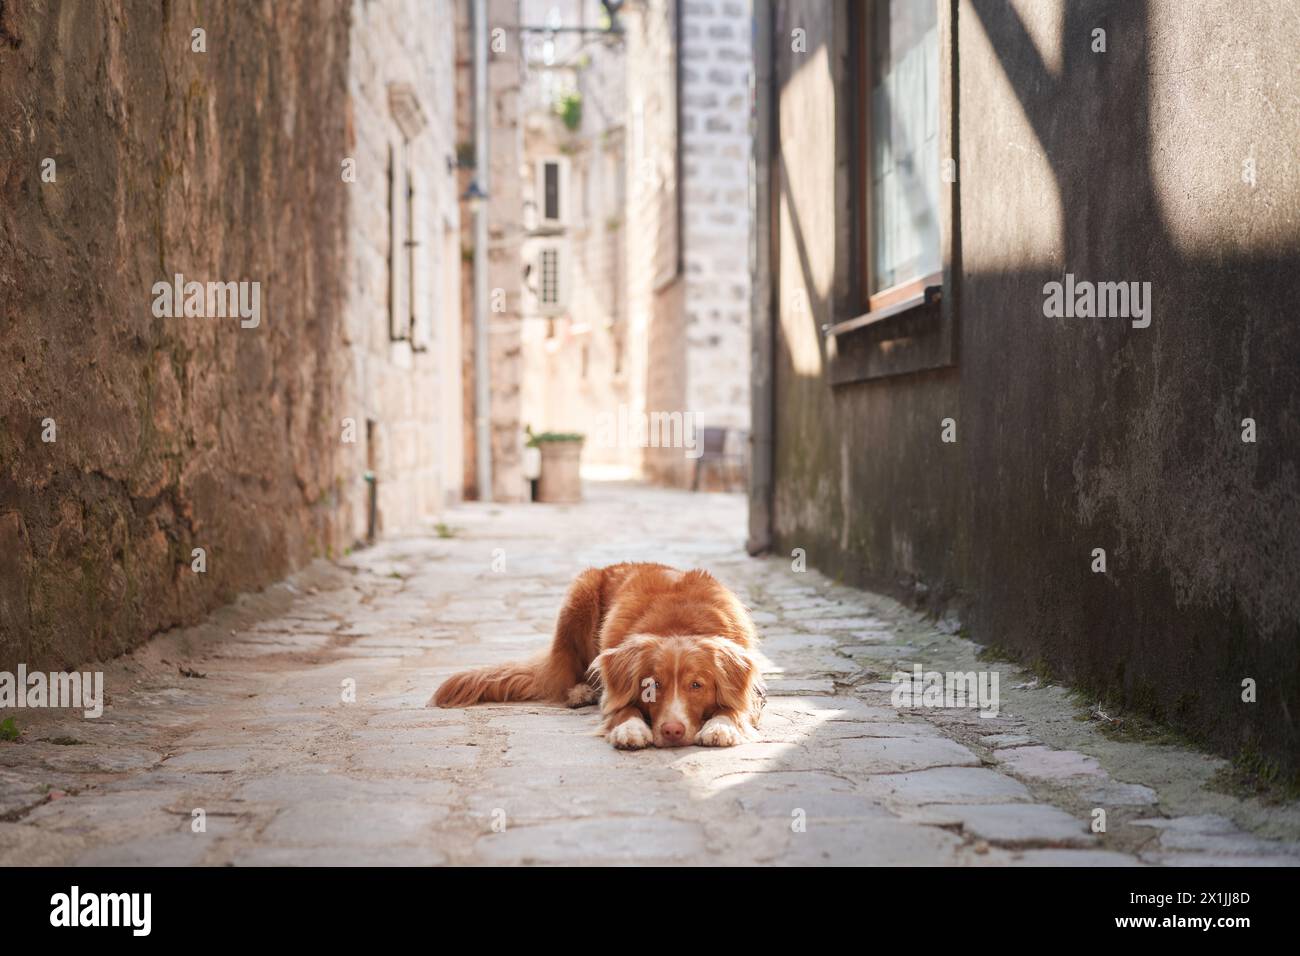 A Nova Scotia Duck Tolling Retriever dog lies on an old cobblestone street, gazing soulfully into the distance.  Stock Photo